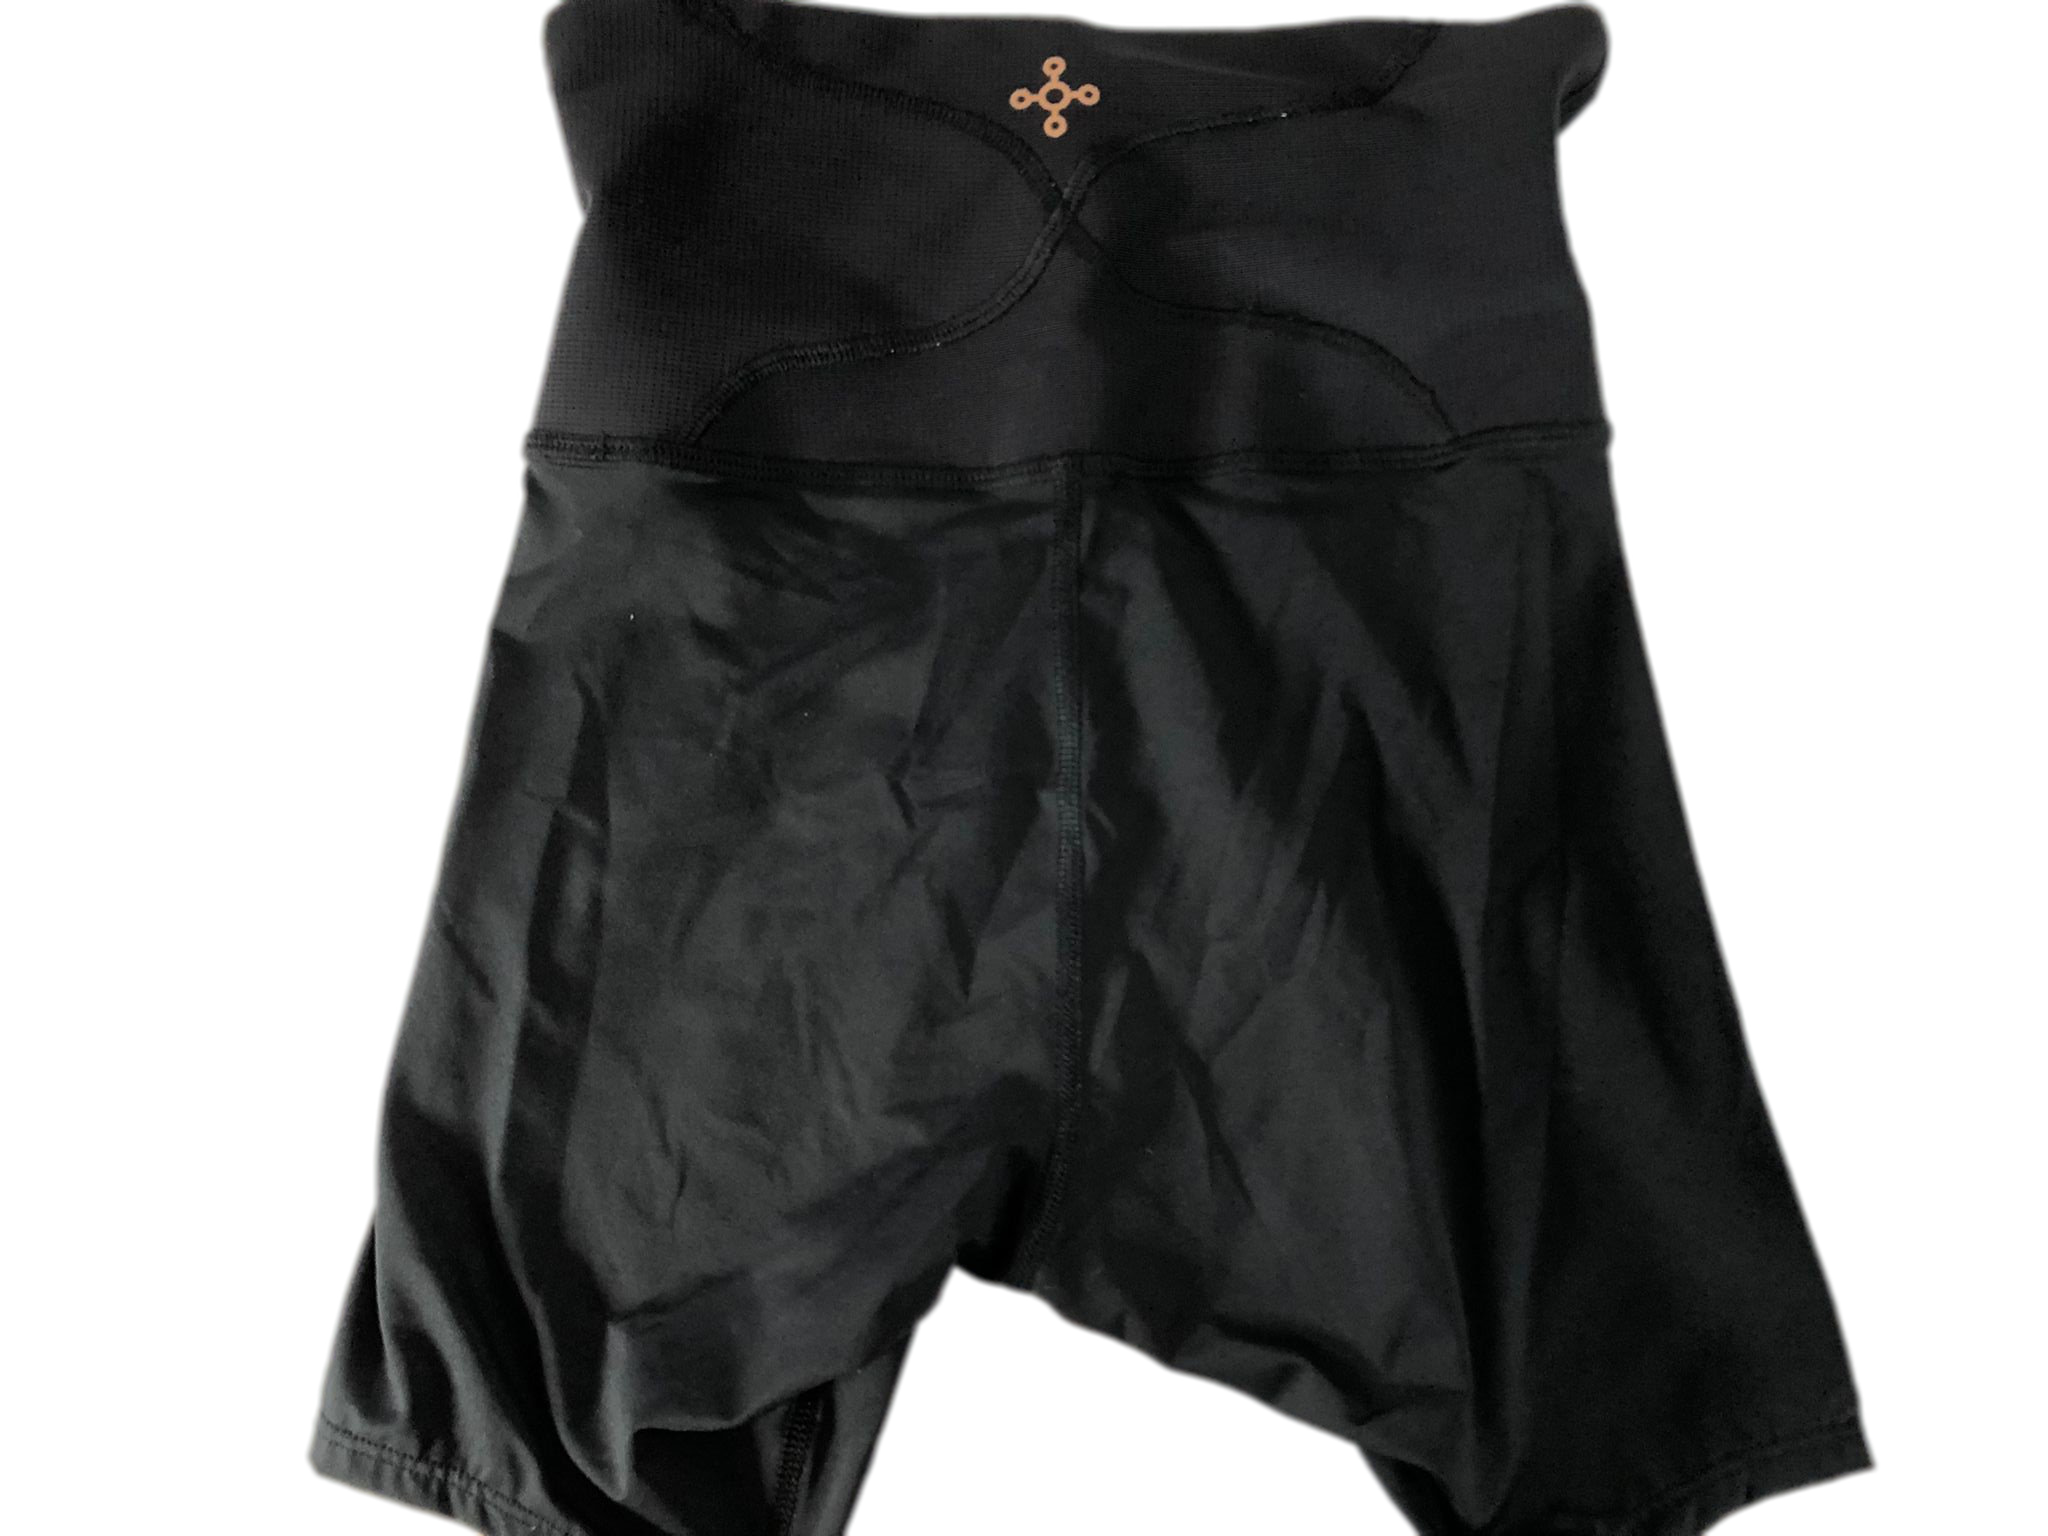 Tommie Copper Women's Lower Back Support Shorts